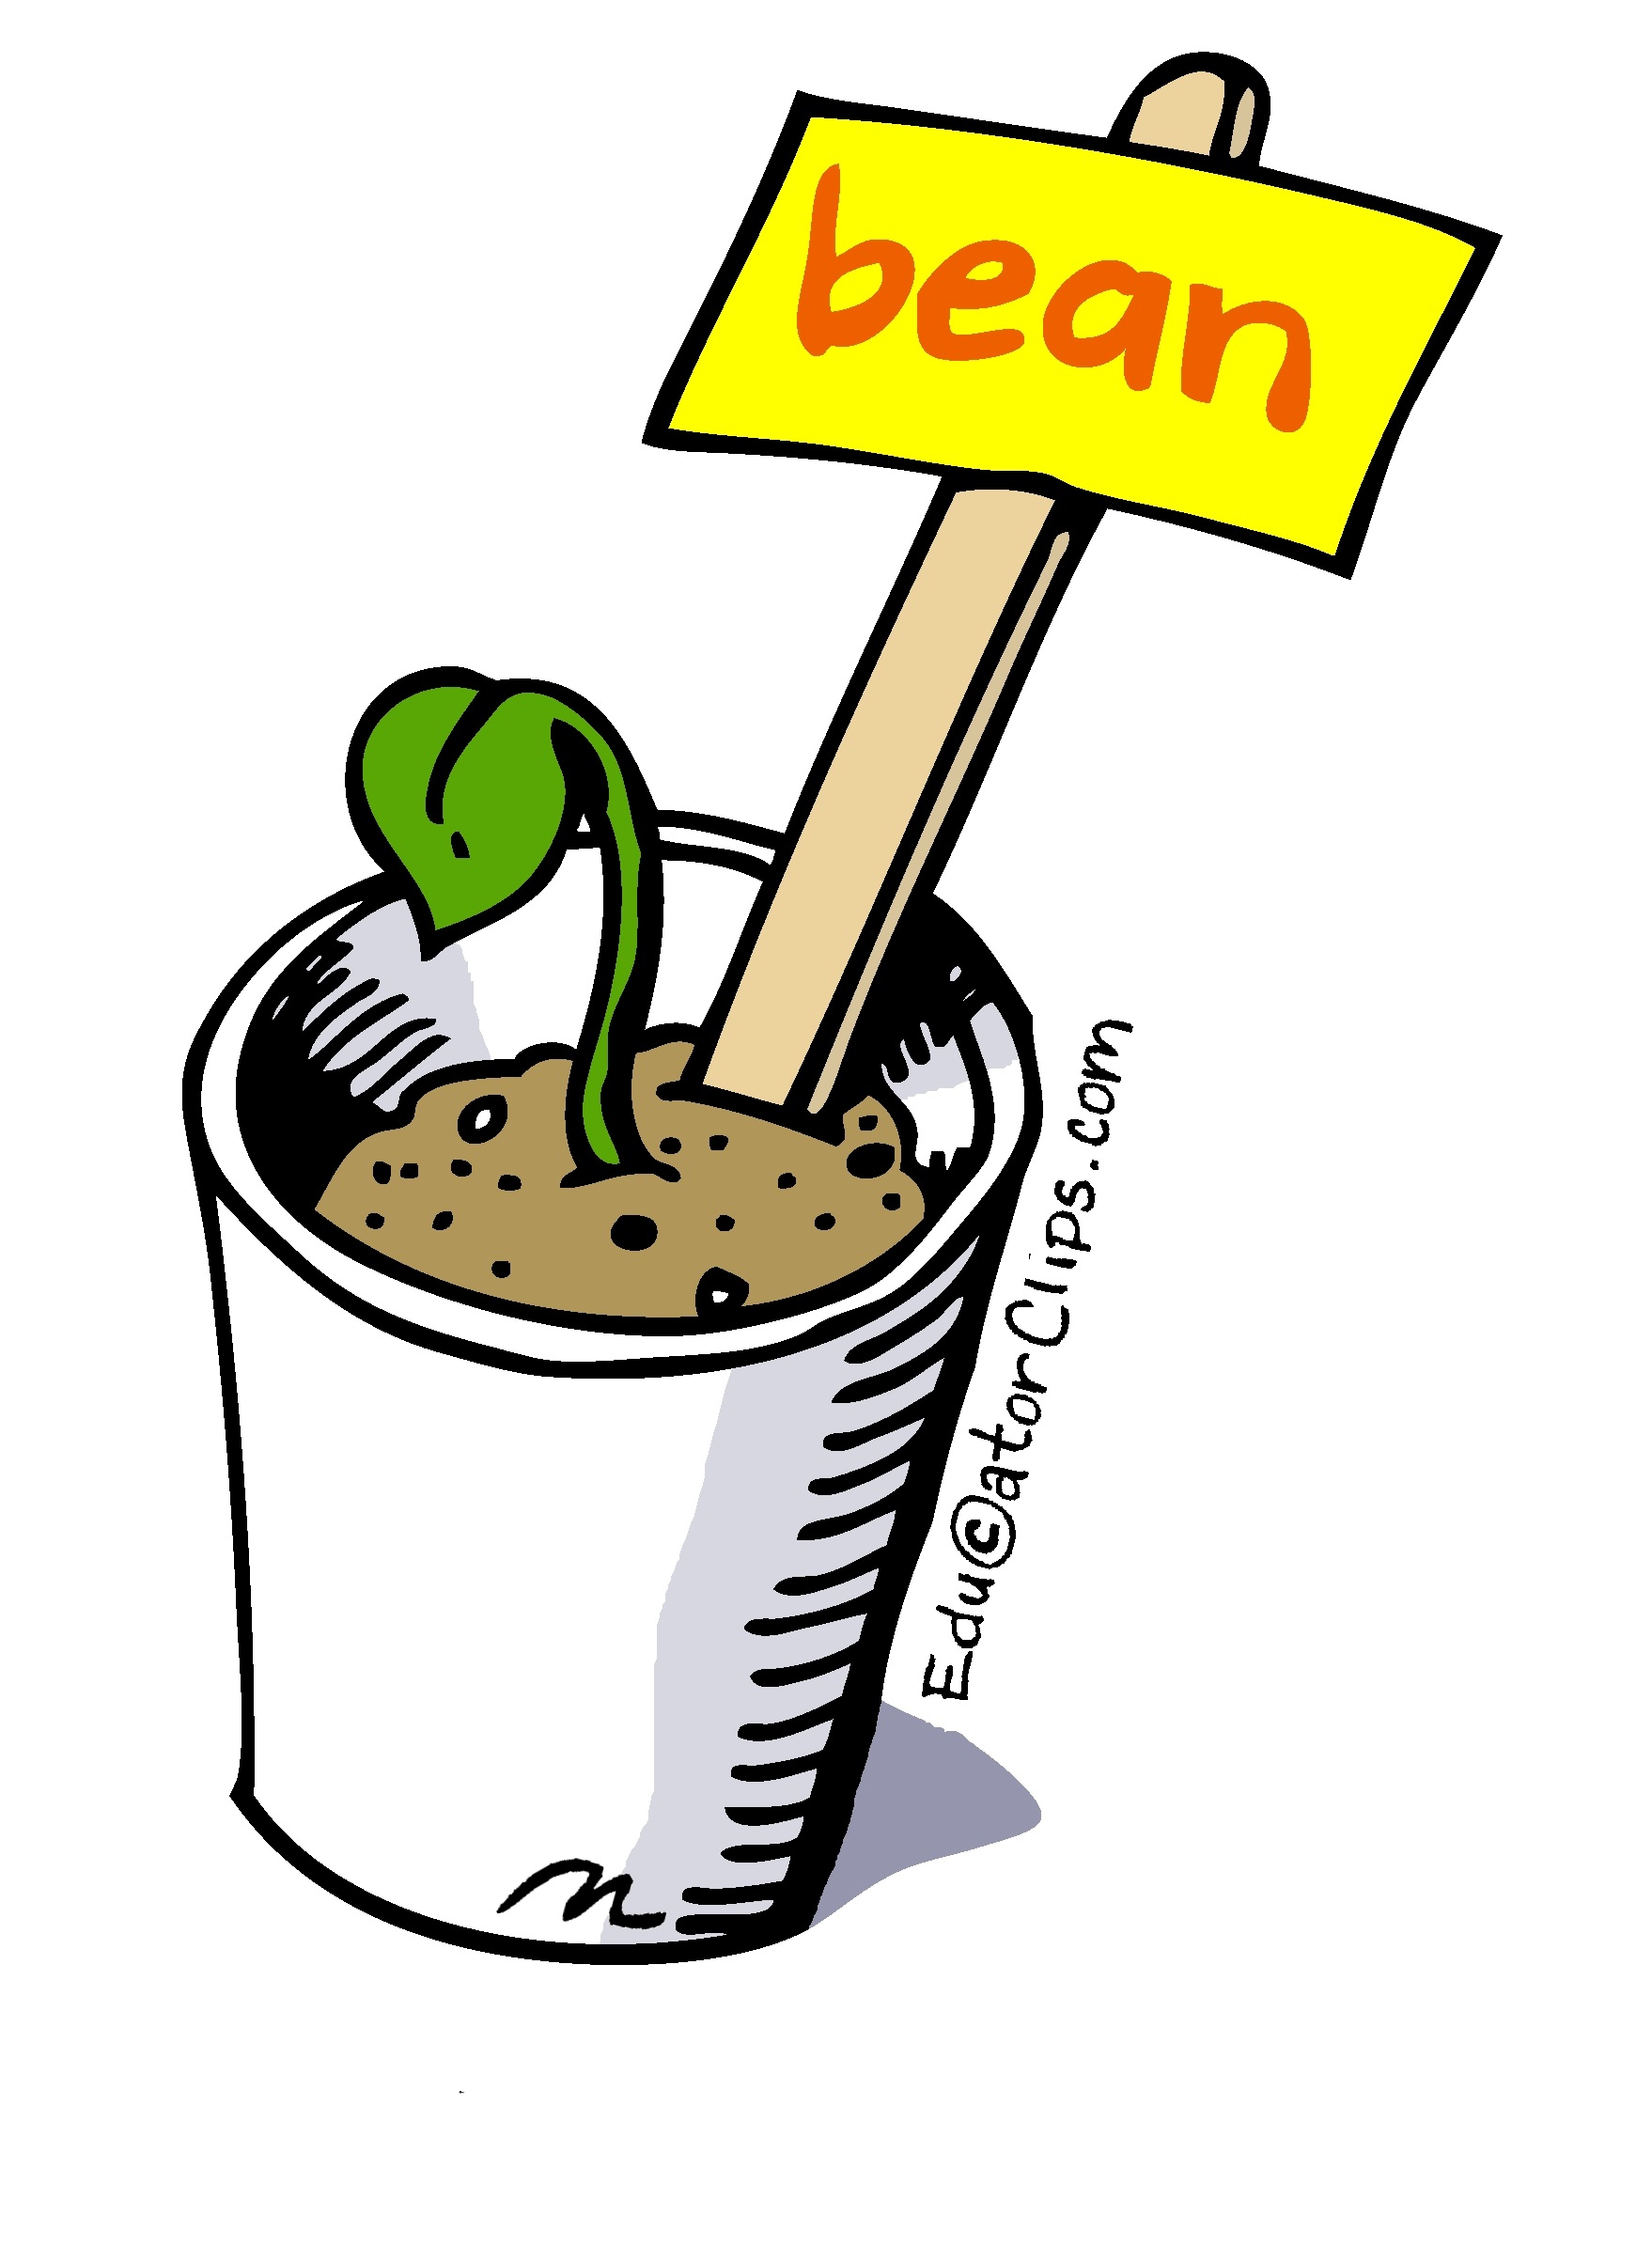 Bean Sprout Art by Mark A. Hicks - color version